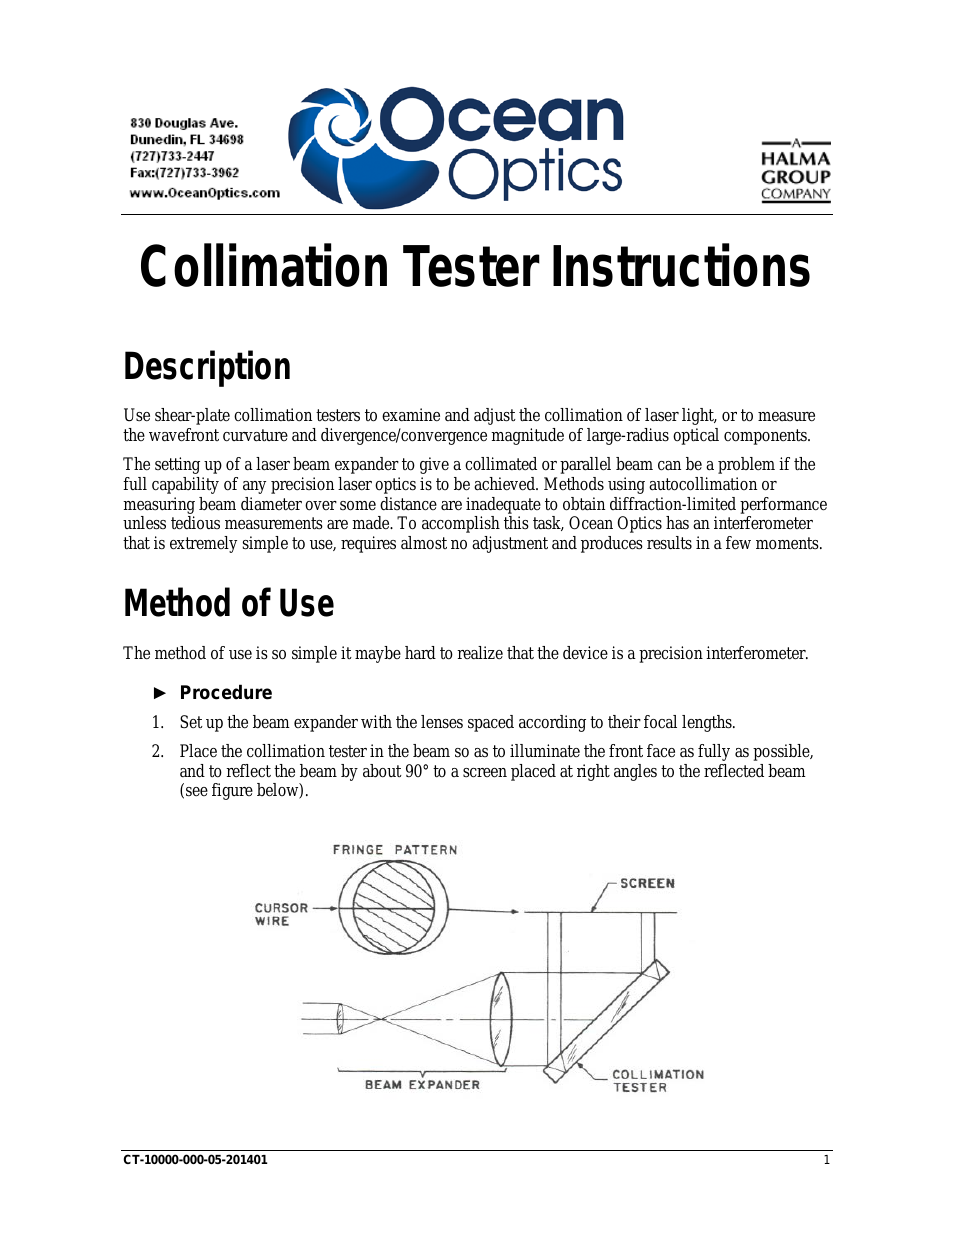 Collimation tester